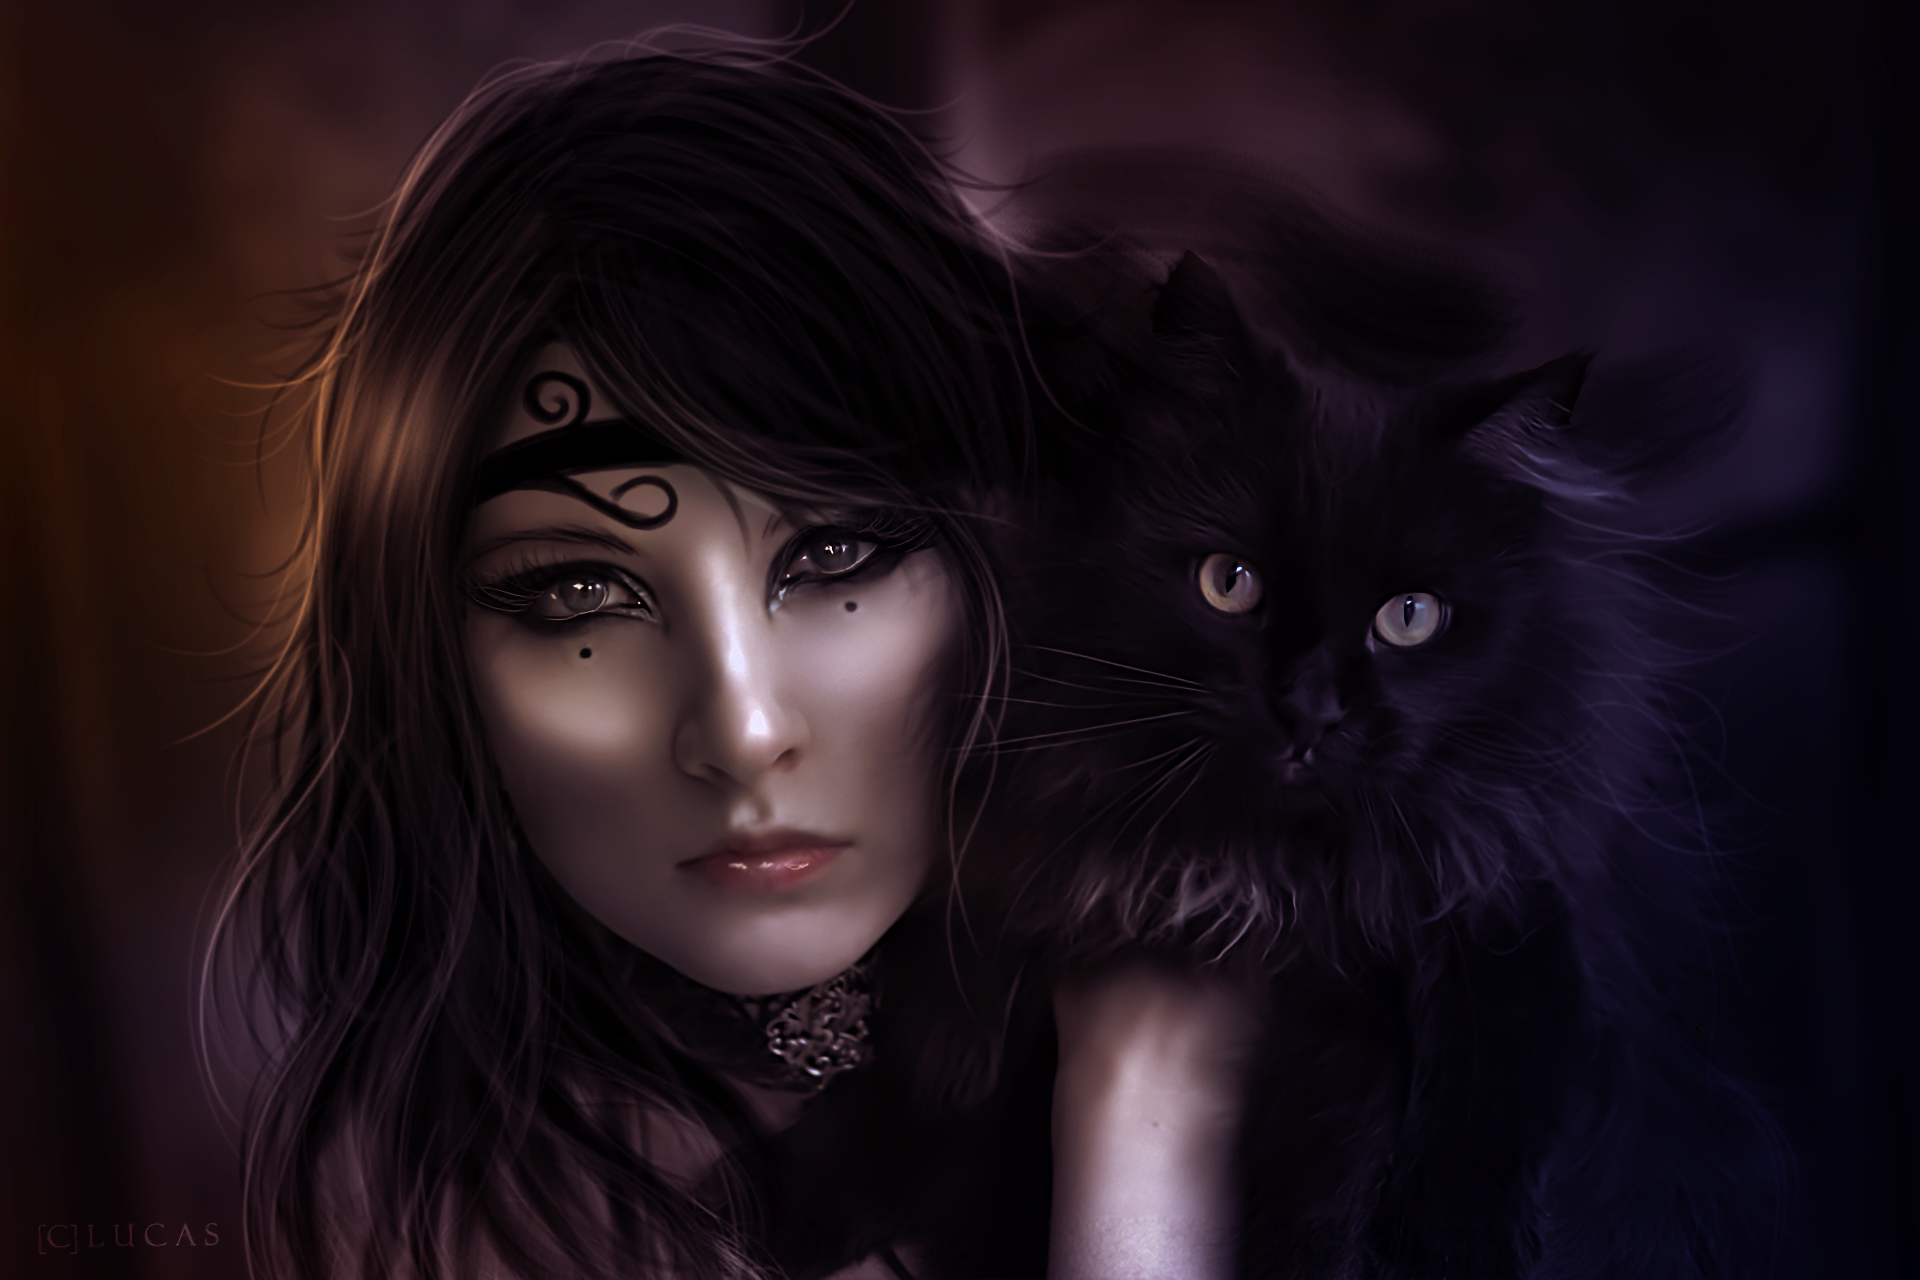 Fantasy Woman with Black Cat